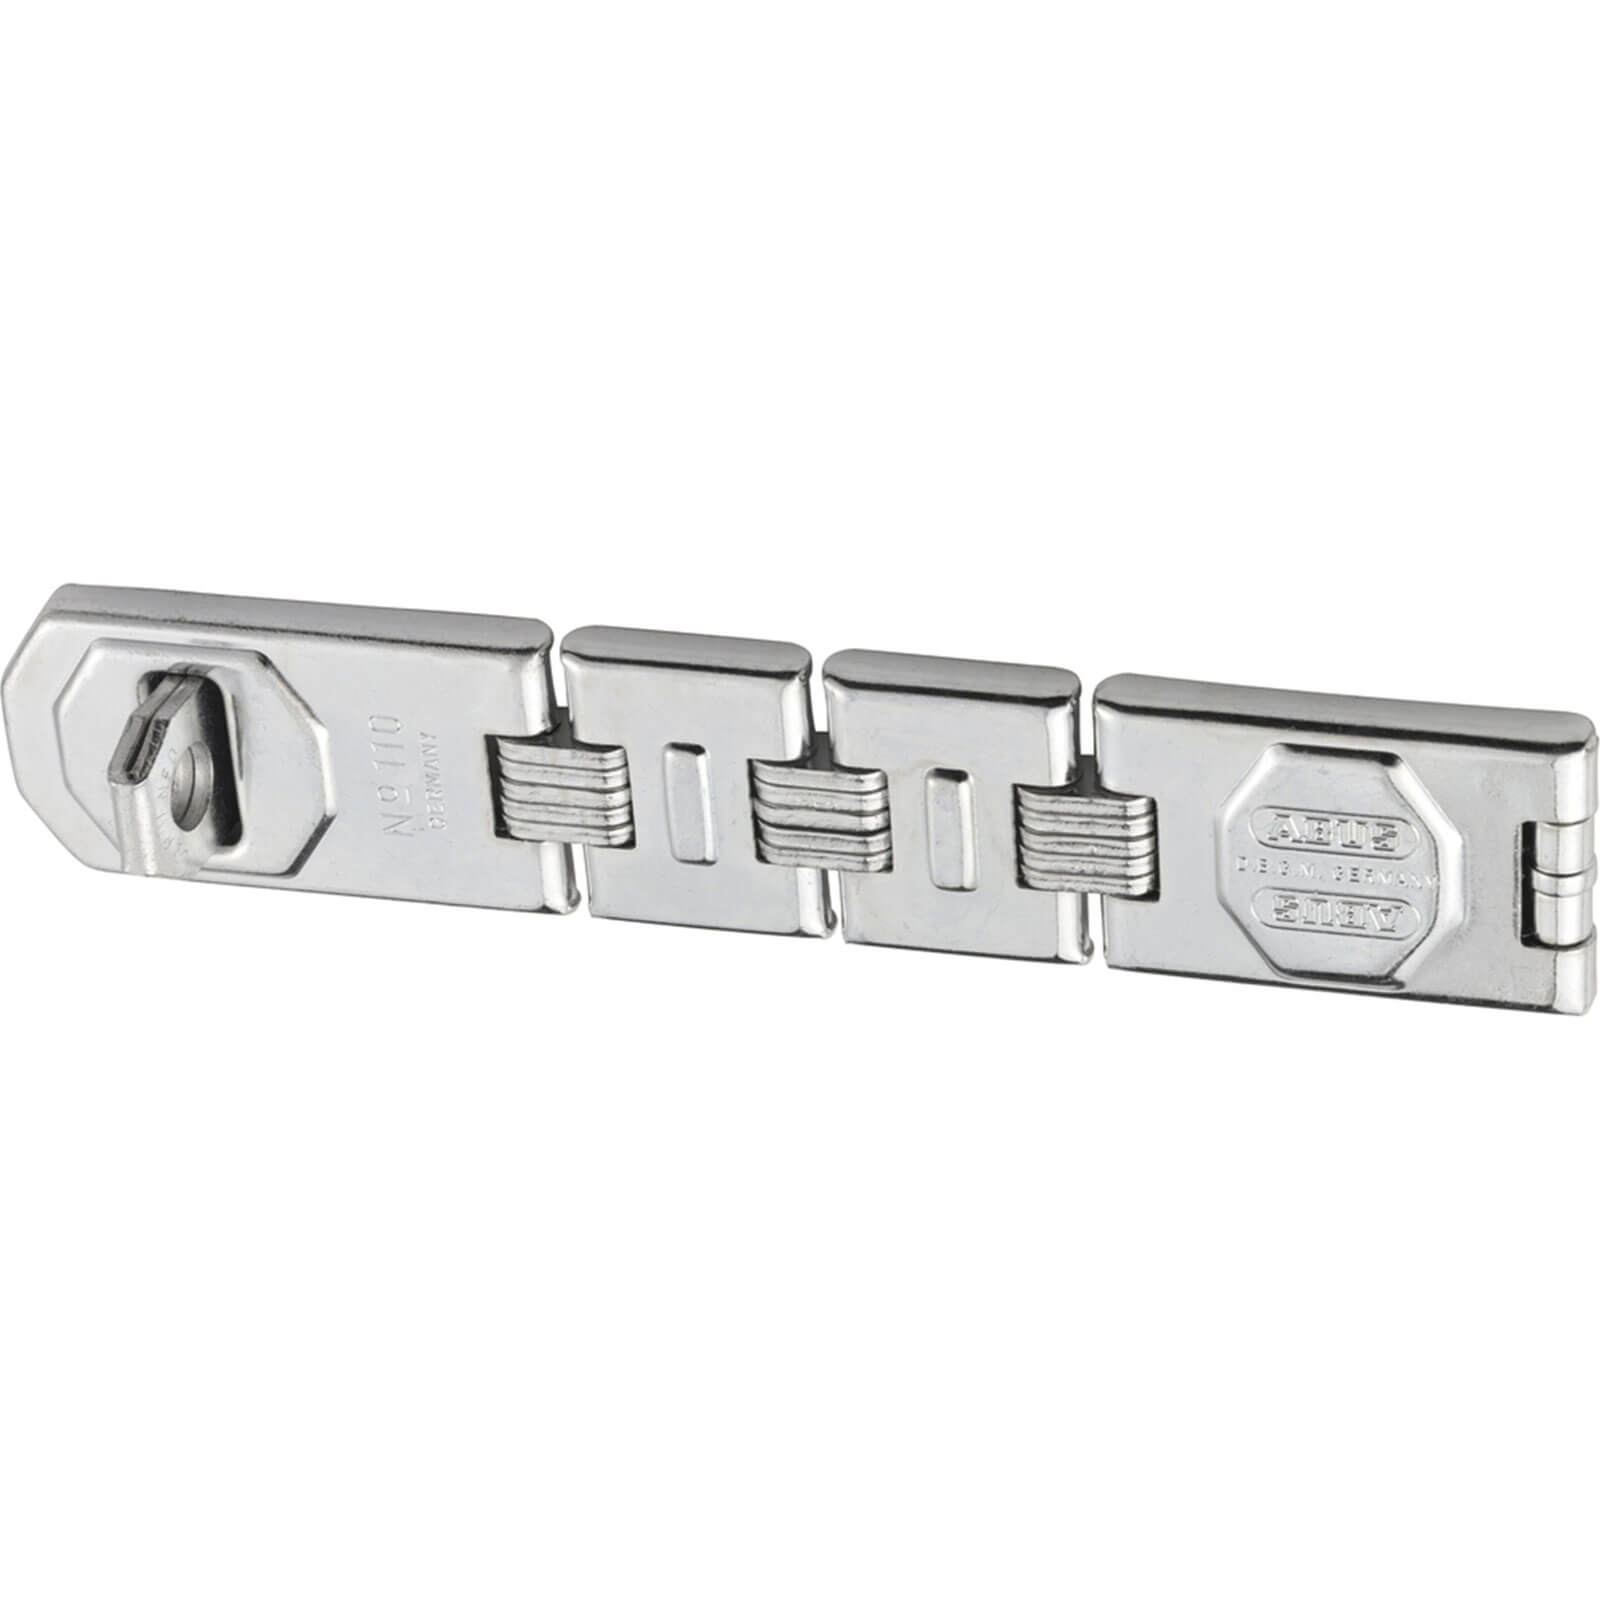 Image of Abus 110 Series Universal Hasp and Staple 230mm Double Jointed